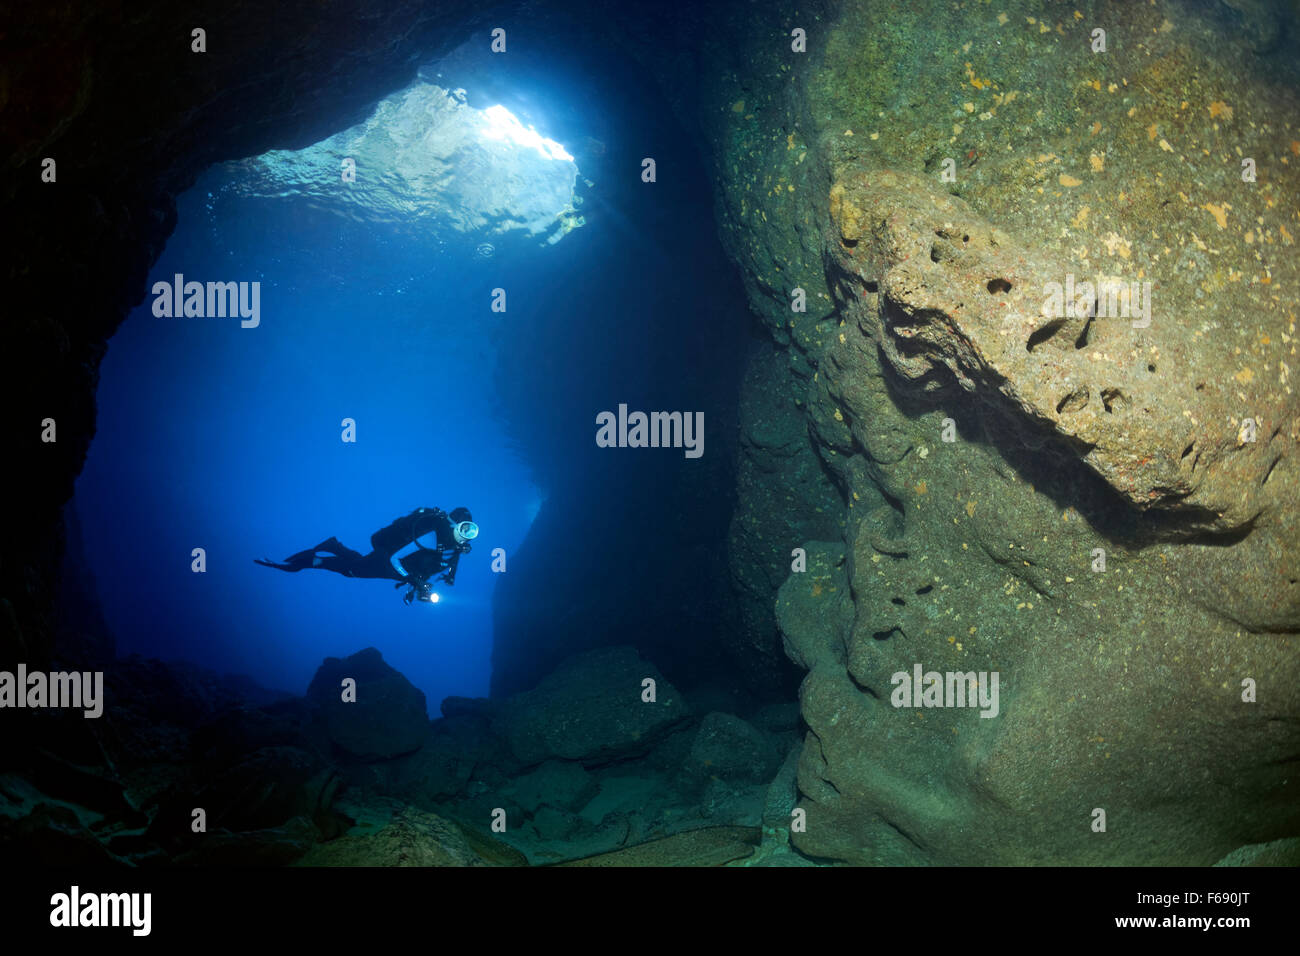 Diver with lamp in rocky cave, sparse growth, sponges (Polifera), Corfu, Ionian Islands, Mediterranean Sea, Greece Stock Photo